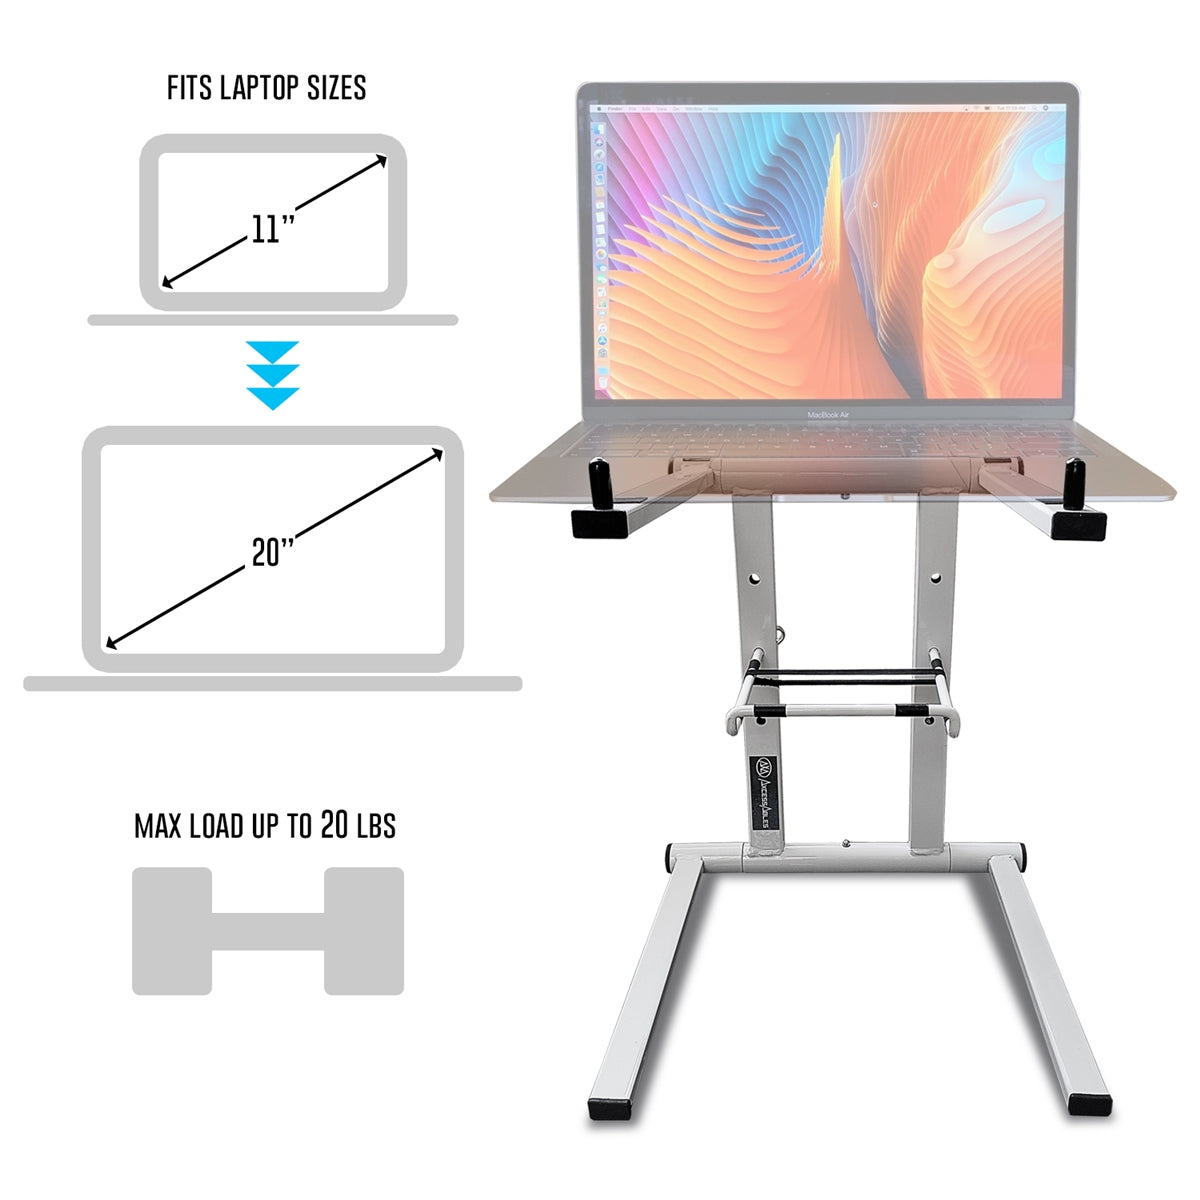 AxcessAbles DJLTS-01 DJ Tabletop Laptop Stand with Bag. For Home Office, Standing Desk, PC, Gaming, DJ, Studio. Ergonomic, Elevated Riser Compatible with MacBook (White)